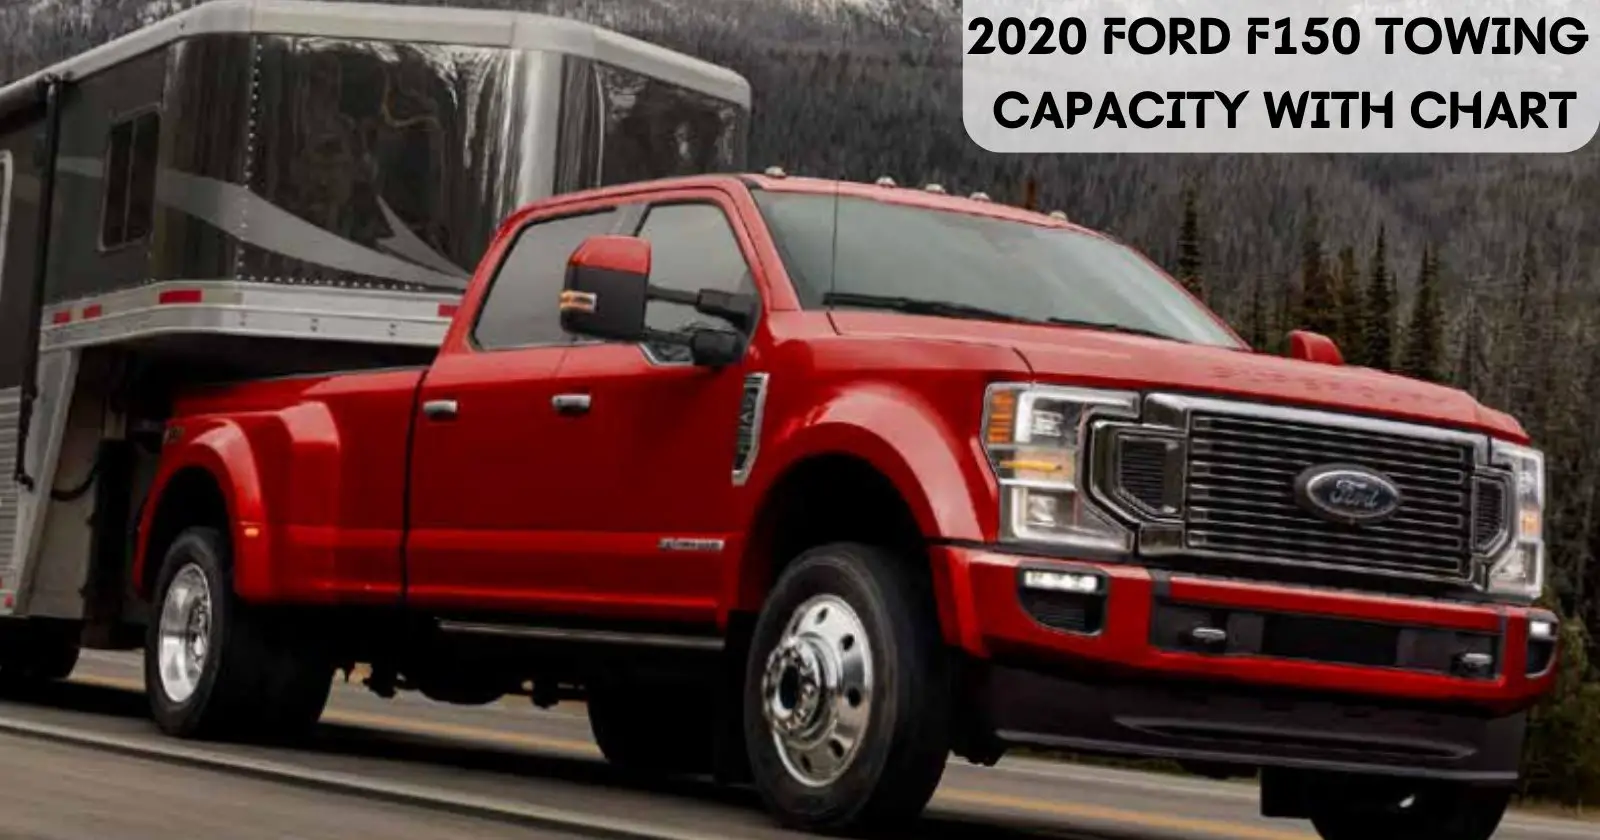 2020-ford-f150-towing-capacity-thecartowing